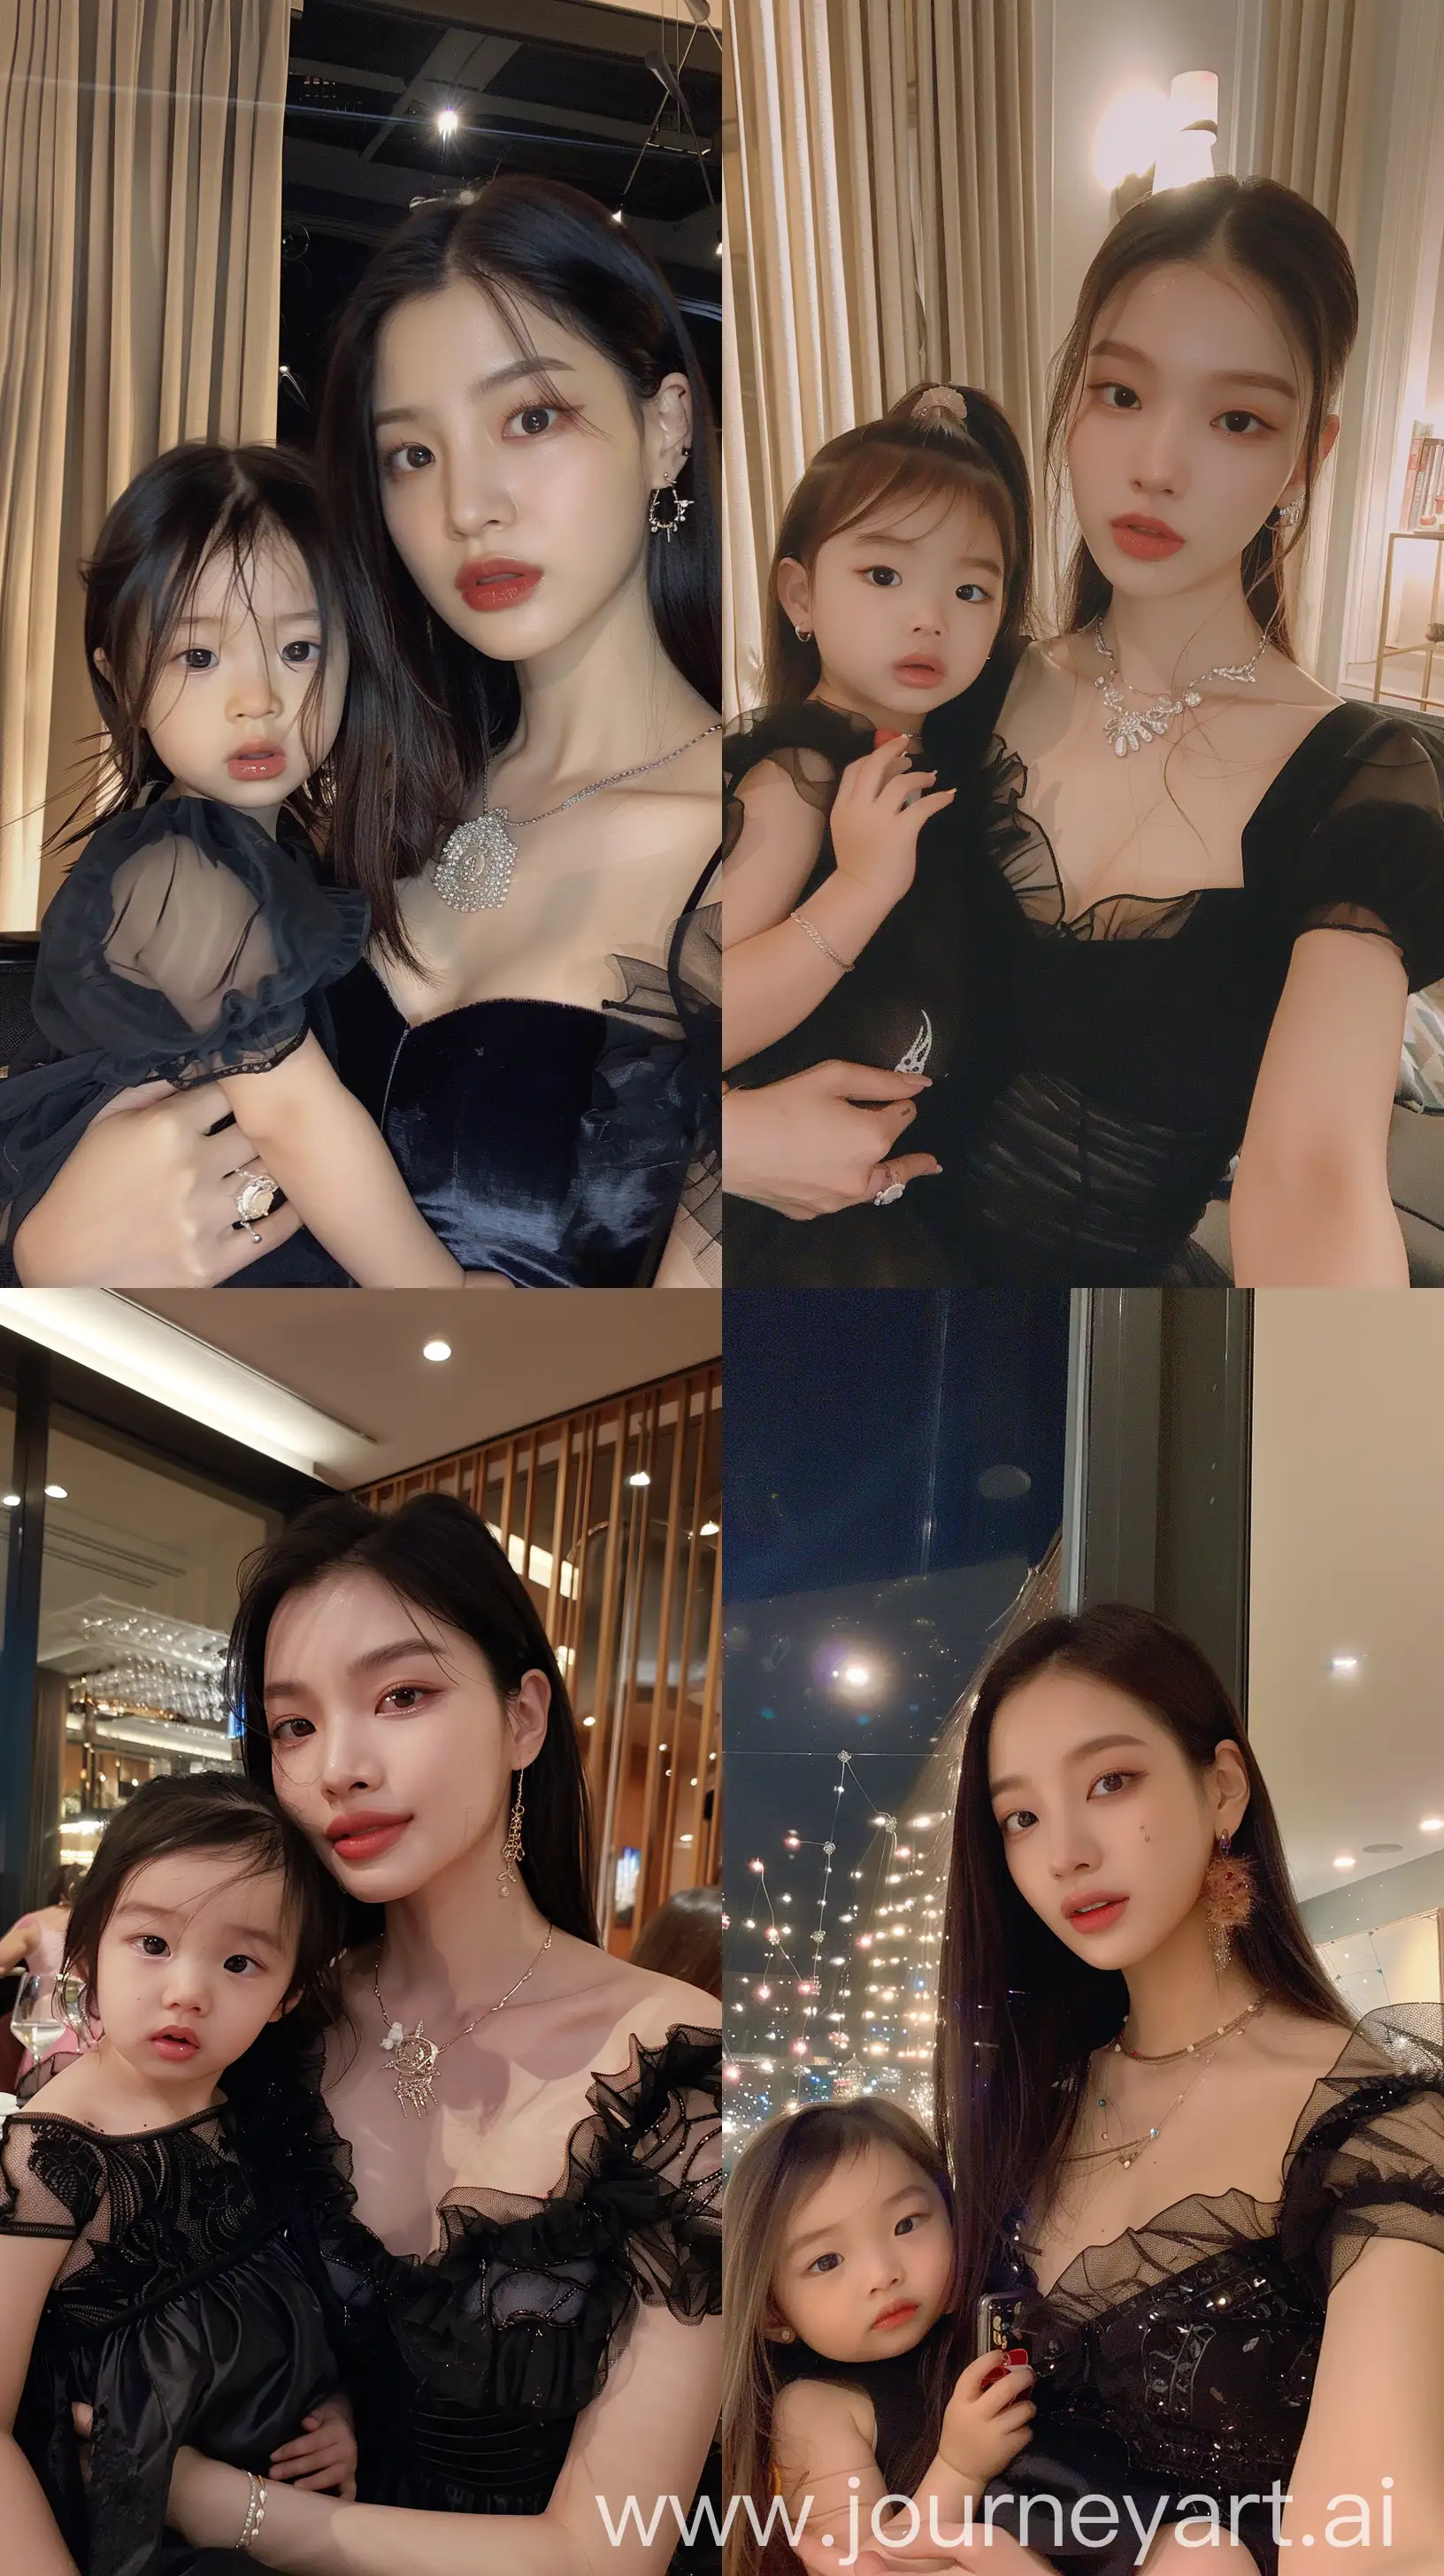 blackpink's jennie,holding 2 years old girl, facial feature look a like blackpink's jennie, aestethic selfie, night times, aestethic make up, weaeing black elegant dress --ar 9:16